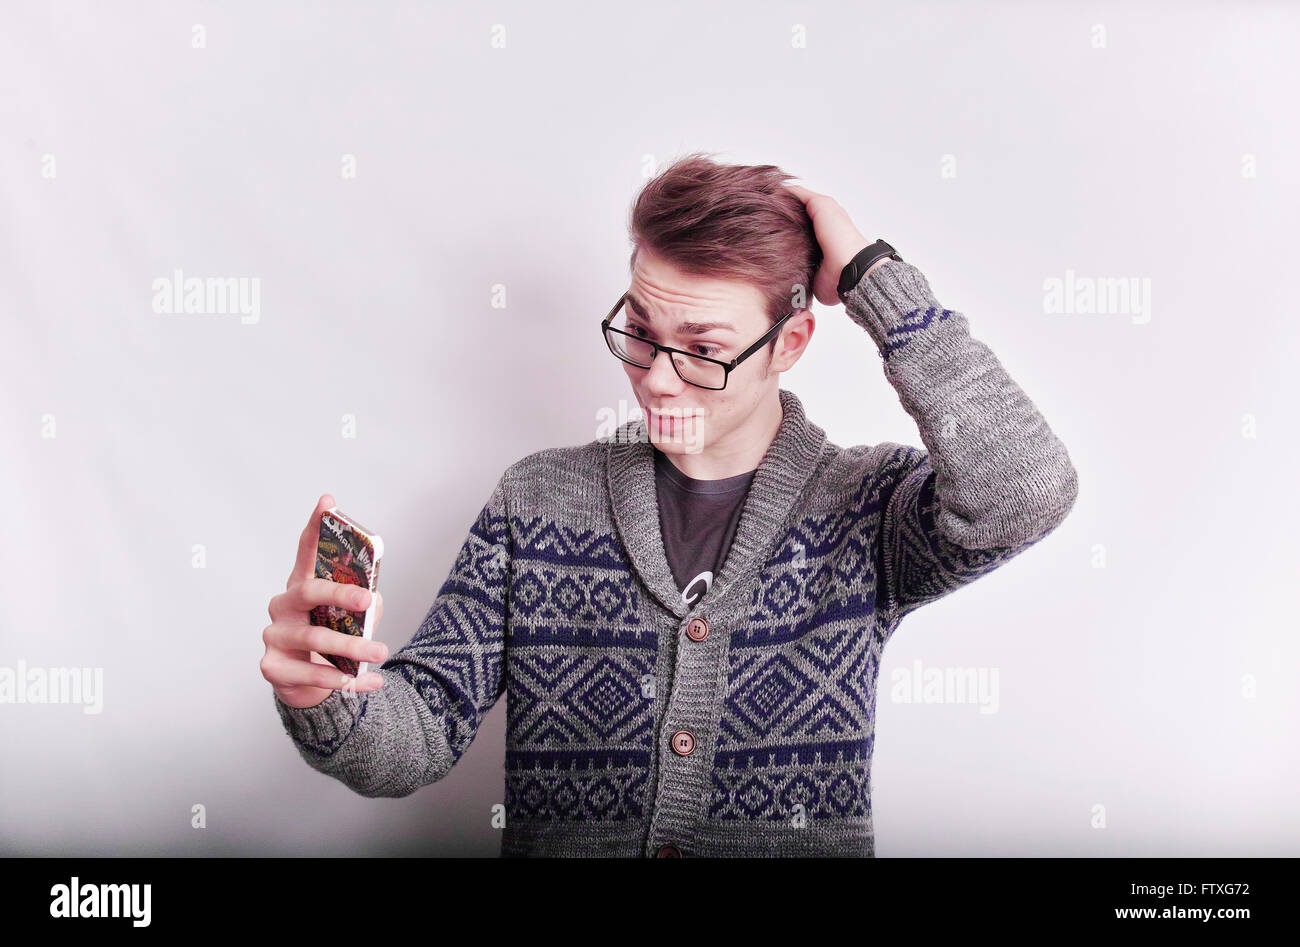 Young man wearing glasses, taking a selfie with a mobile phone while posing with hand on head. Stock Photo